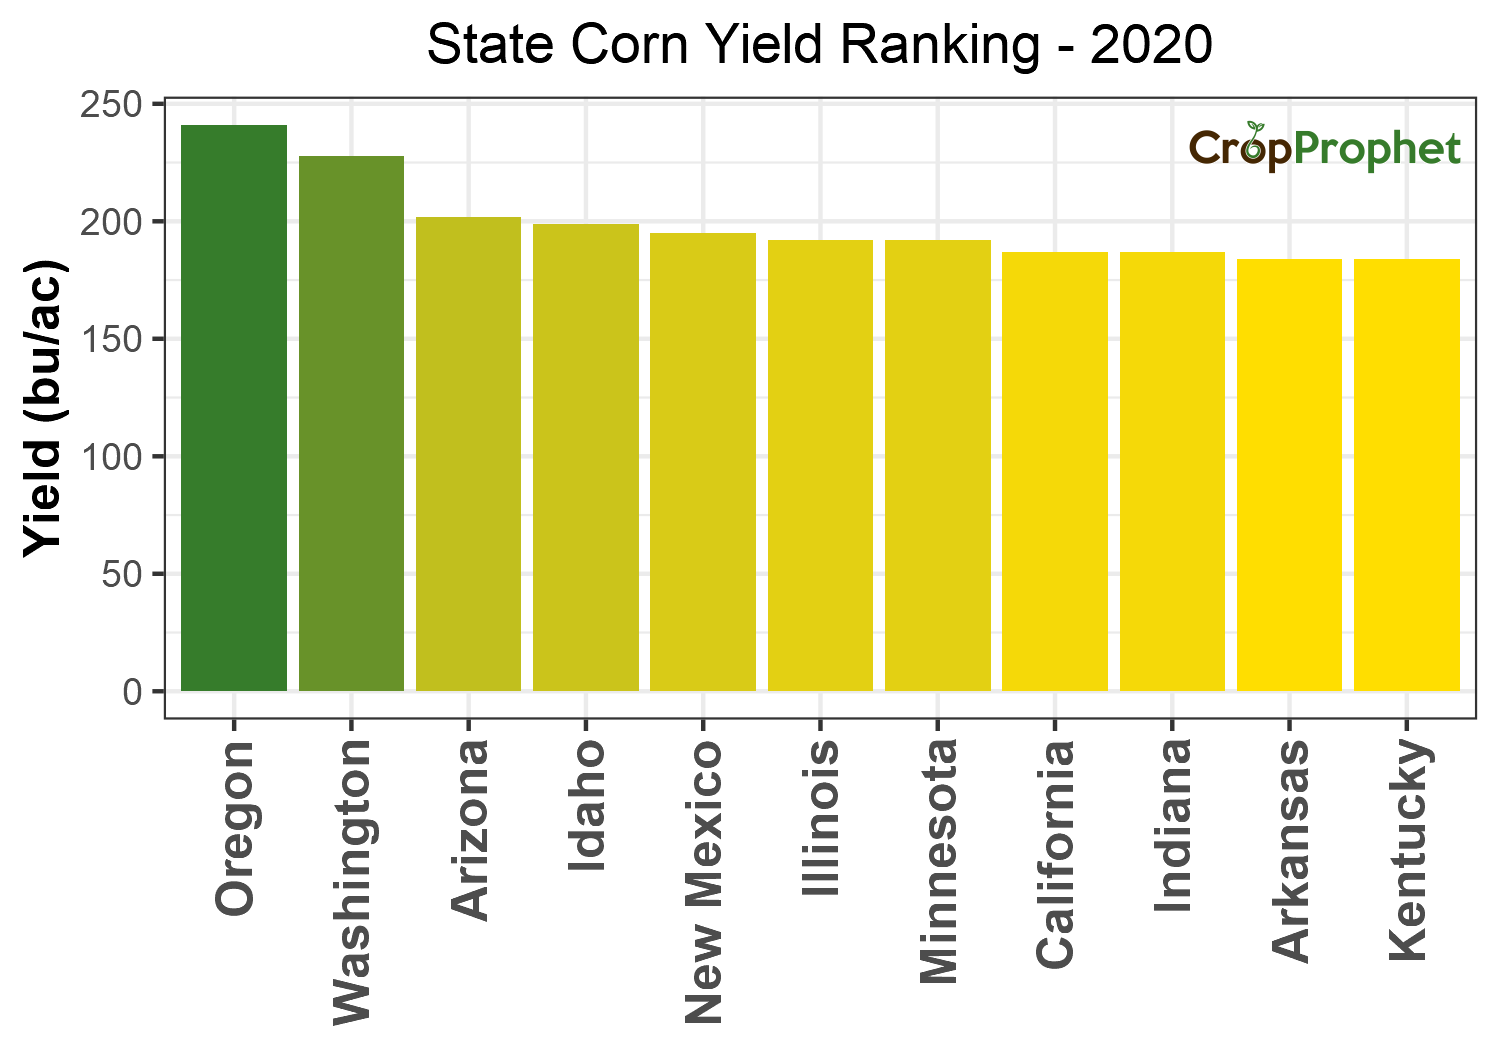 Corn Production by State - 2020 Rankings